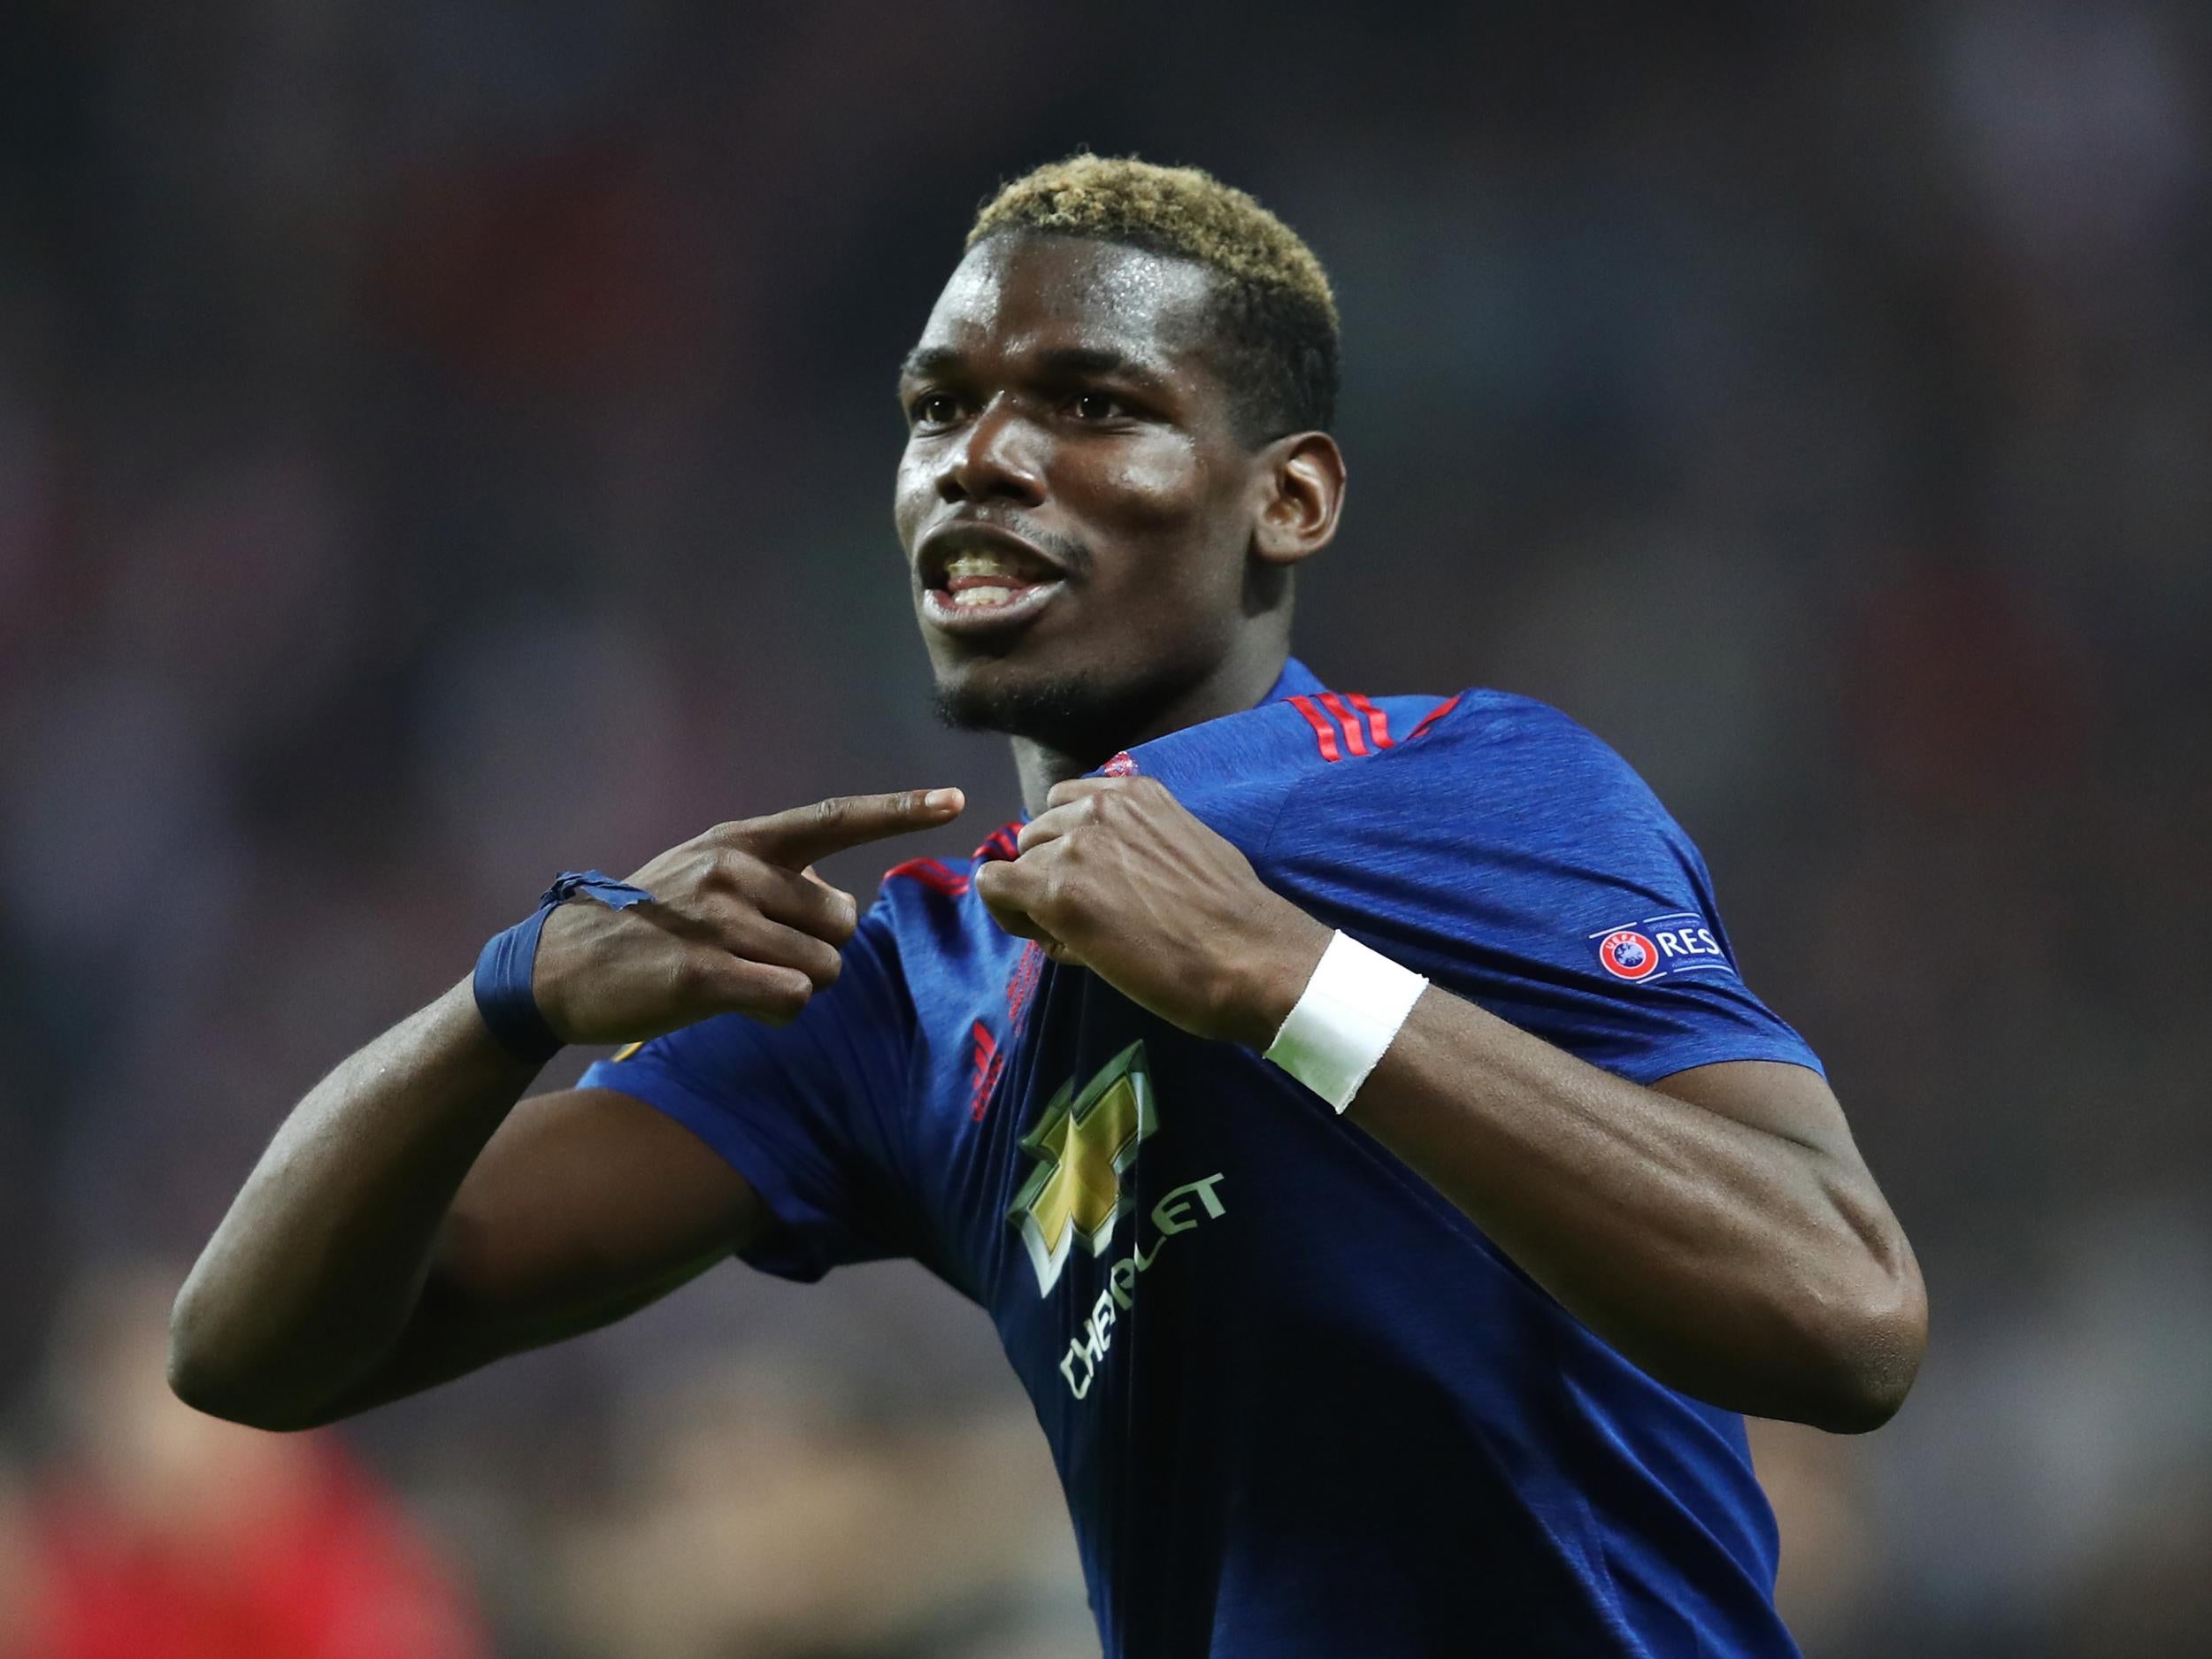 Pogba opened the scoring in United's comfortable 2-0 win